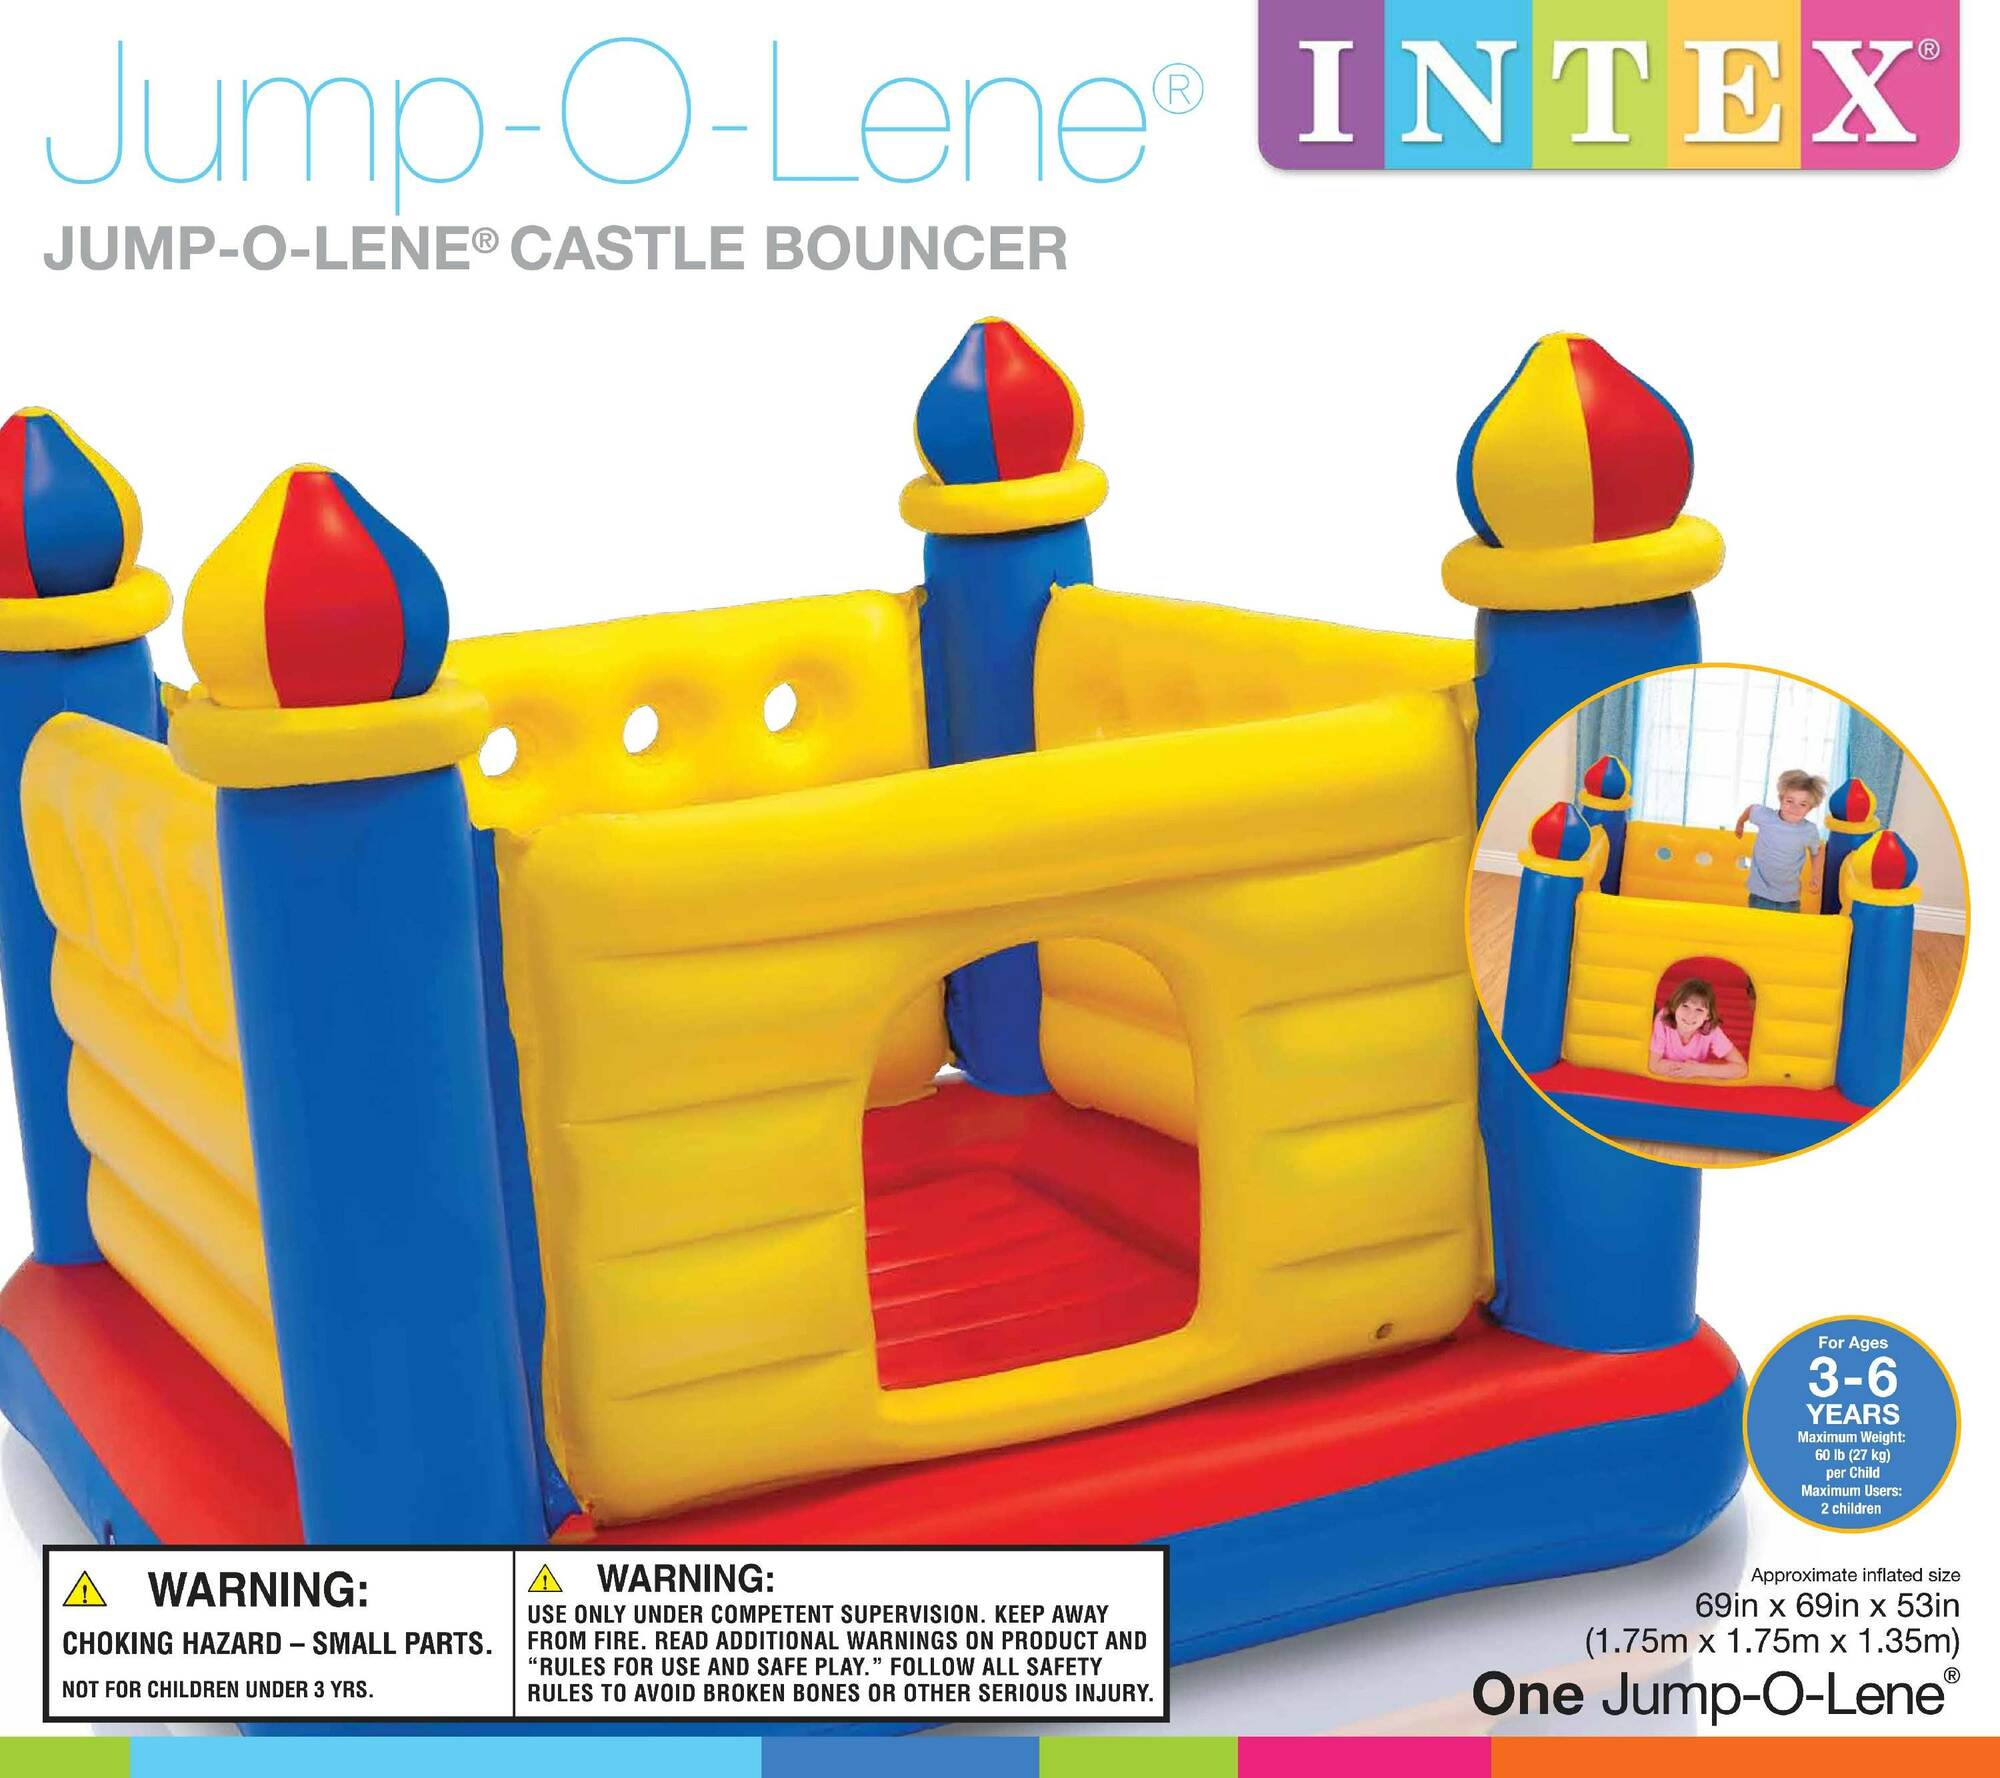 Kid Jump Ages 6 and Under